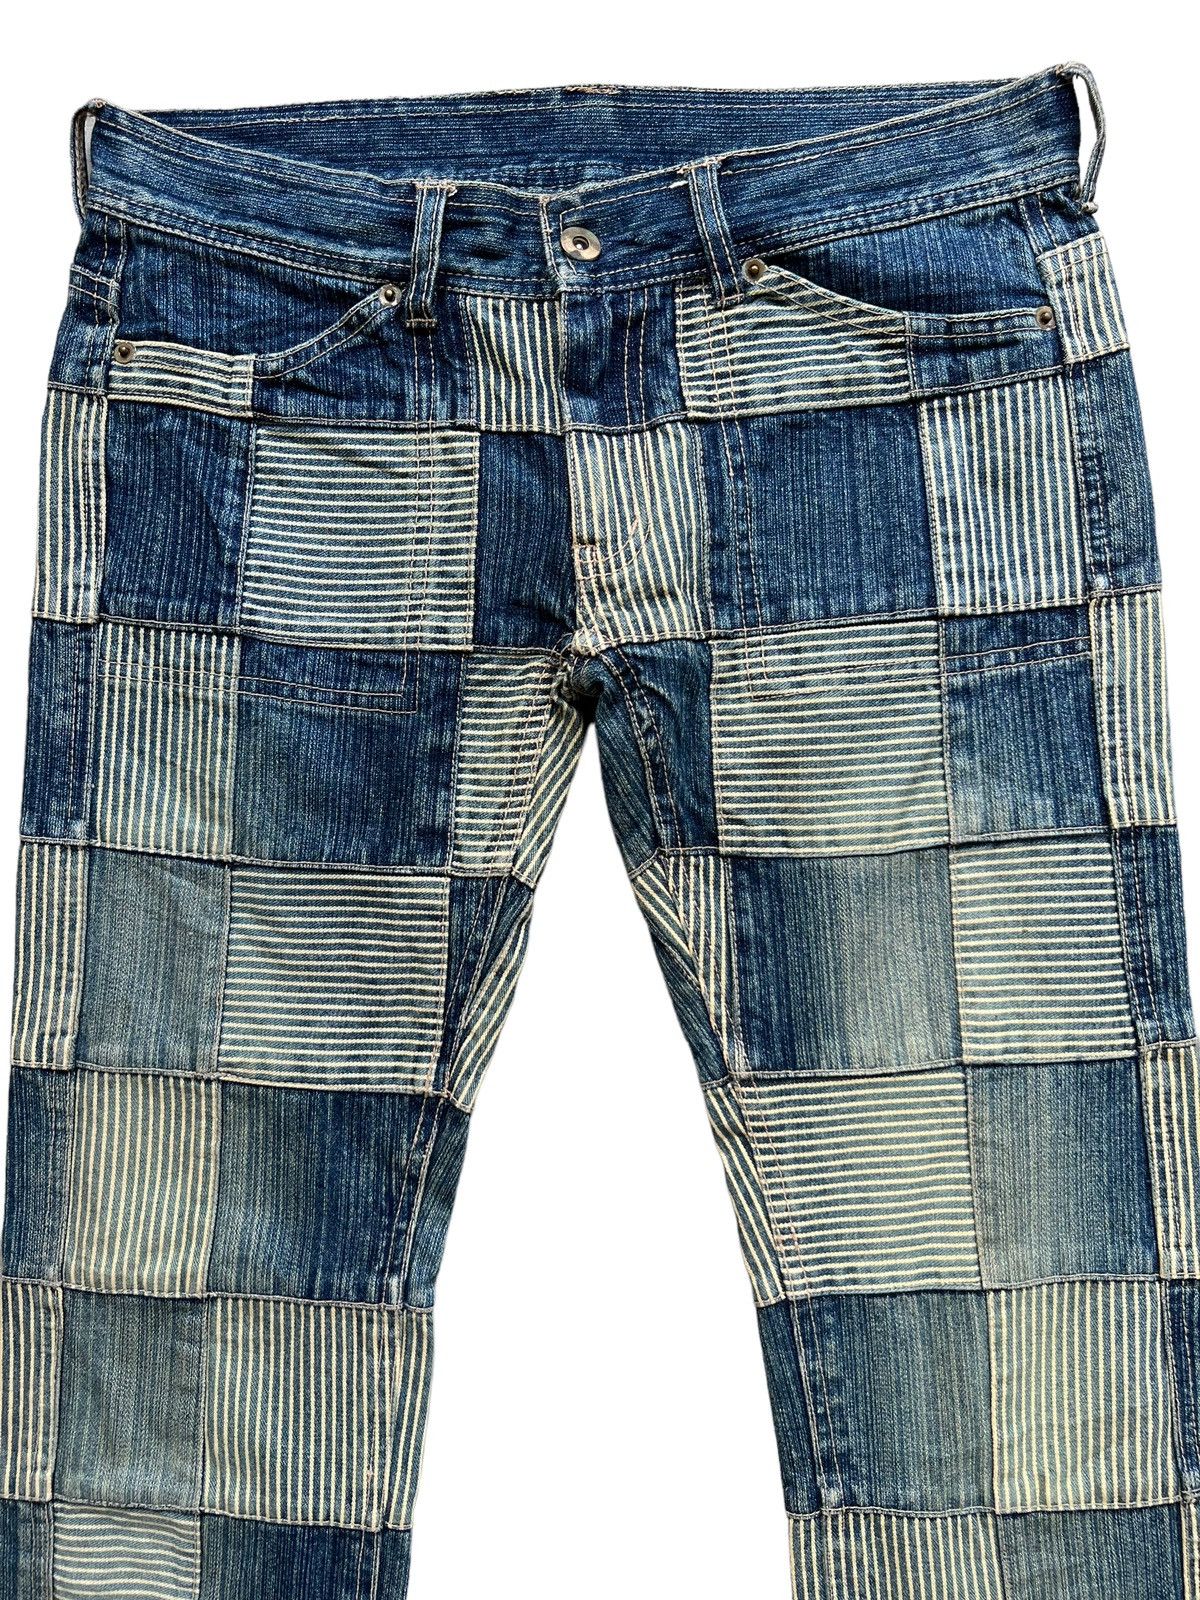 Japanese Brand Inspired by Kapital Patchwork Jeans 31x28.5 - 4